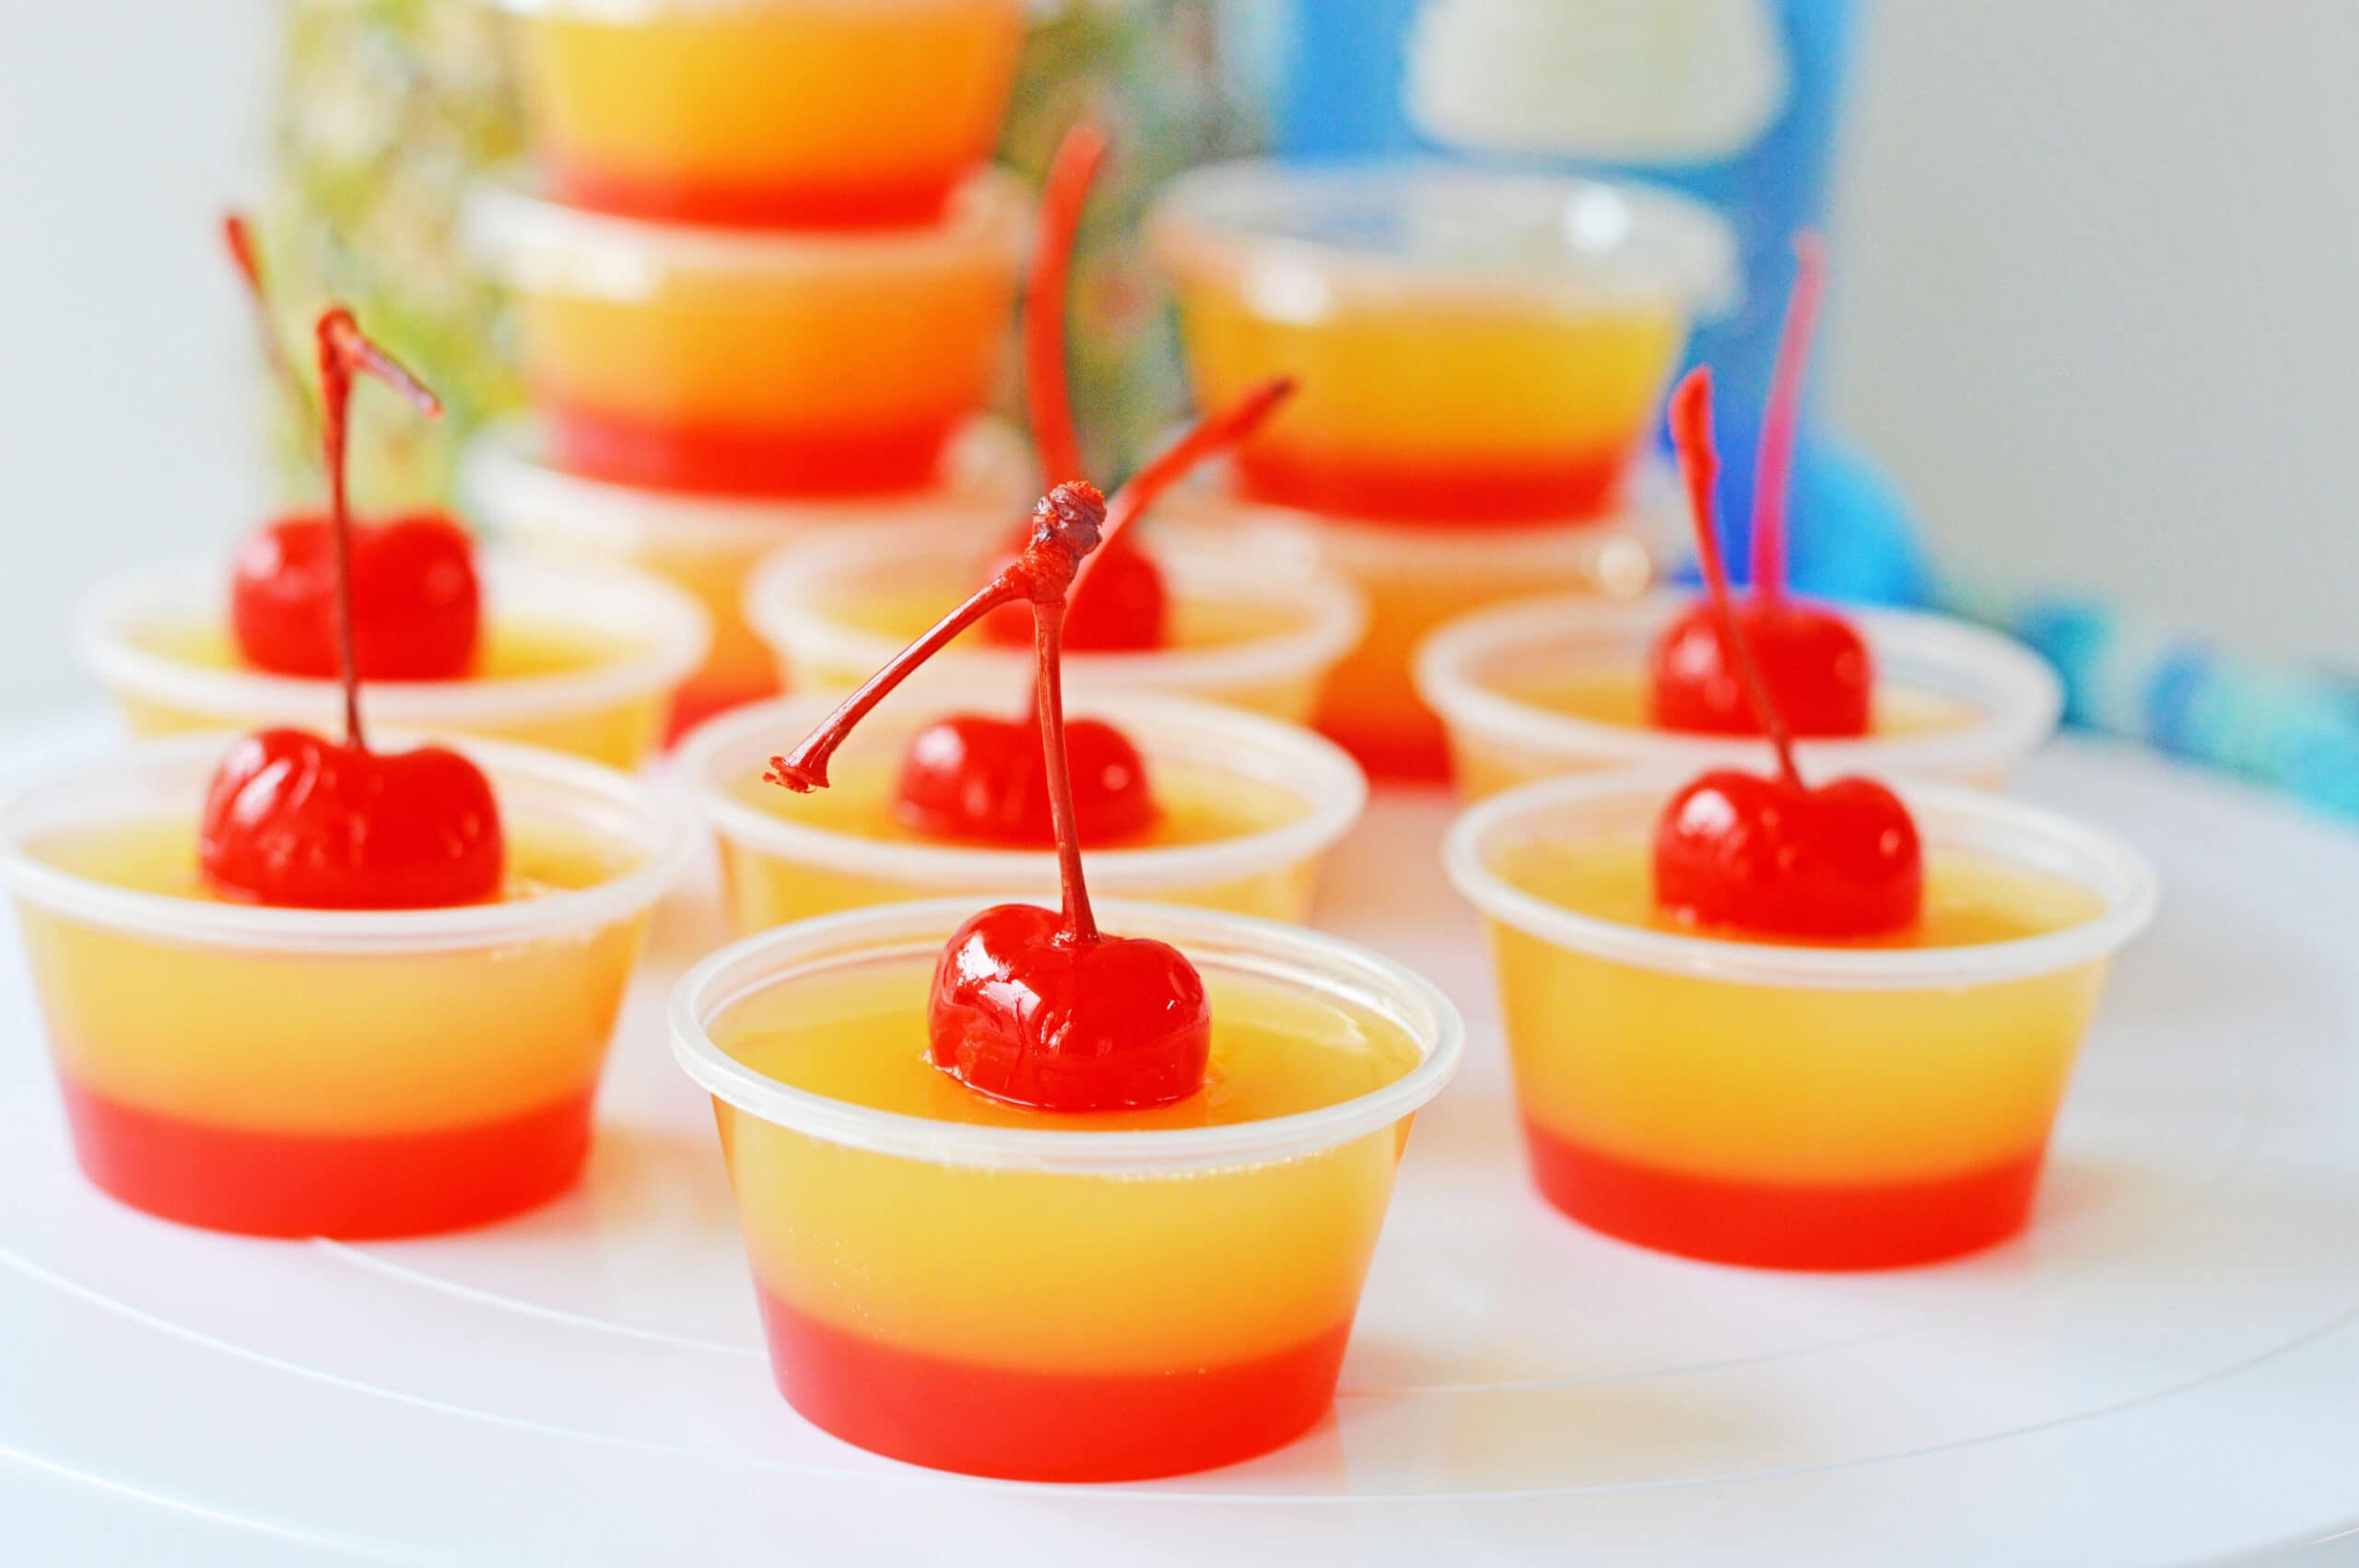 Red and yellow jello shots with cherries